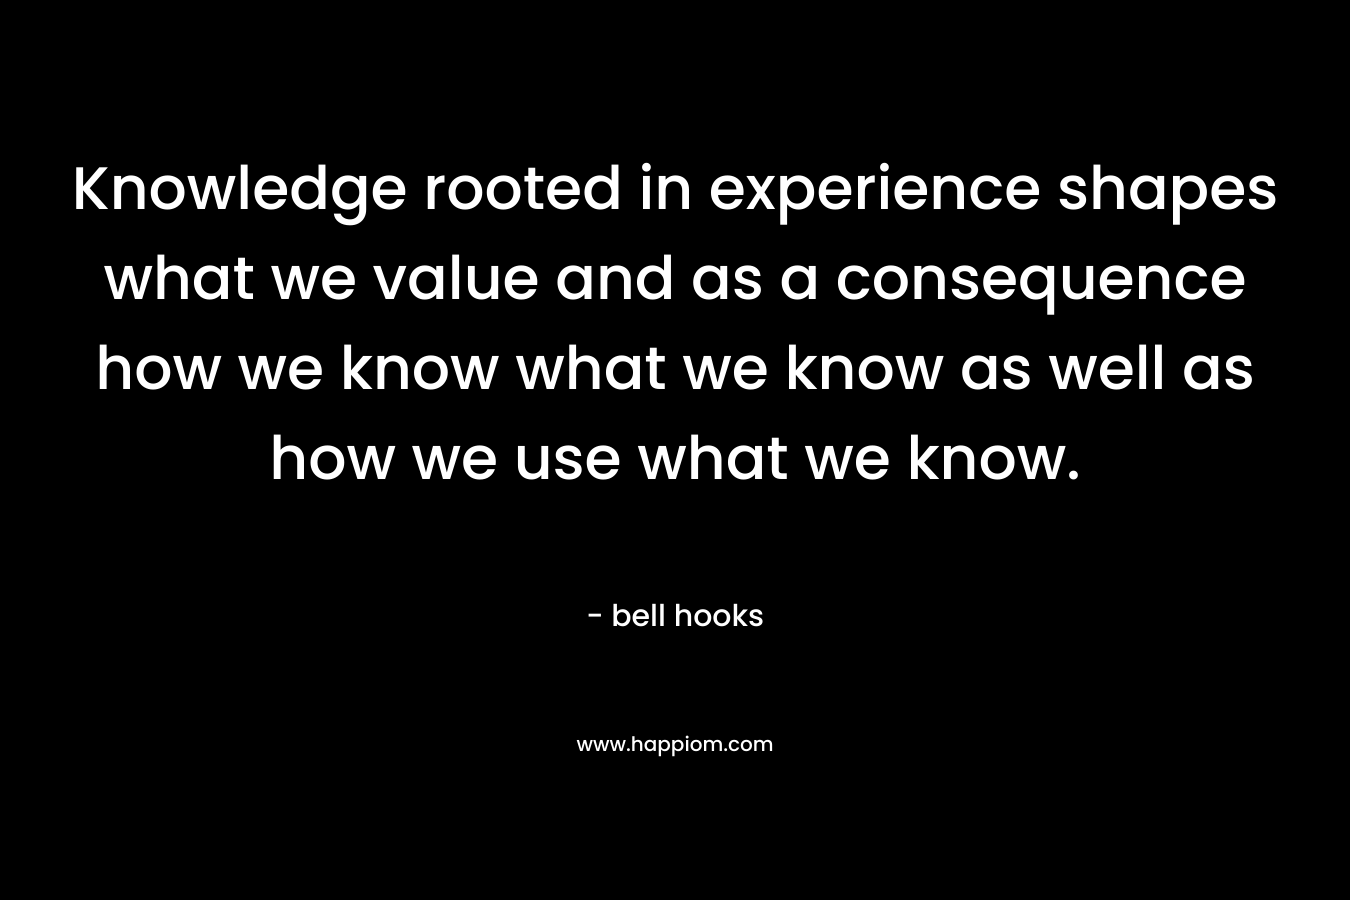 Knowledge rooted in experience shapes what we value and as a consequence how we know what we know as well as how we use what we know.